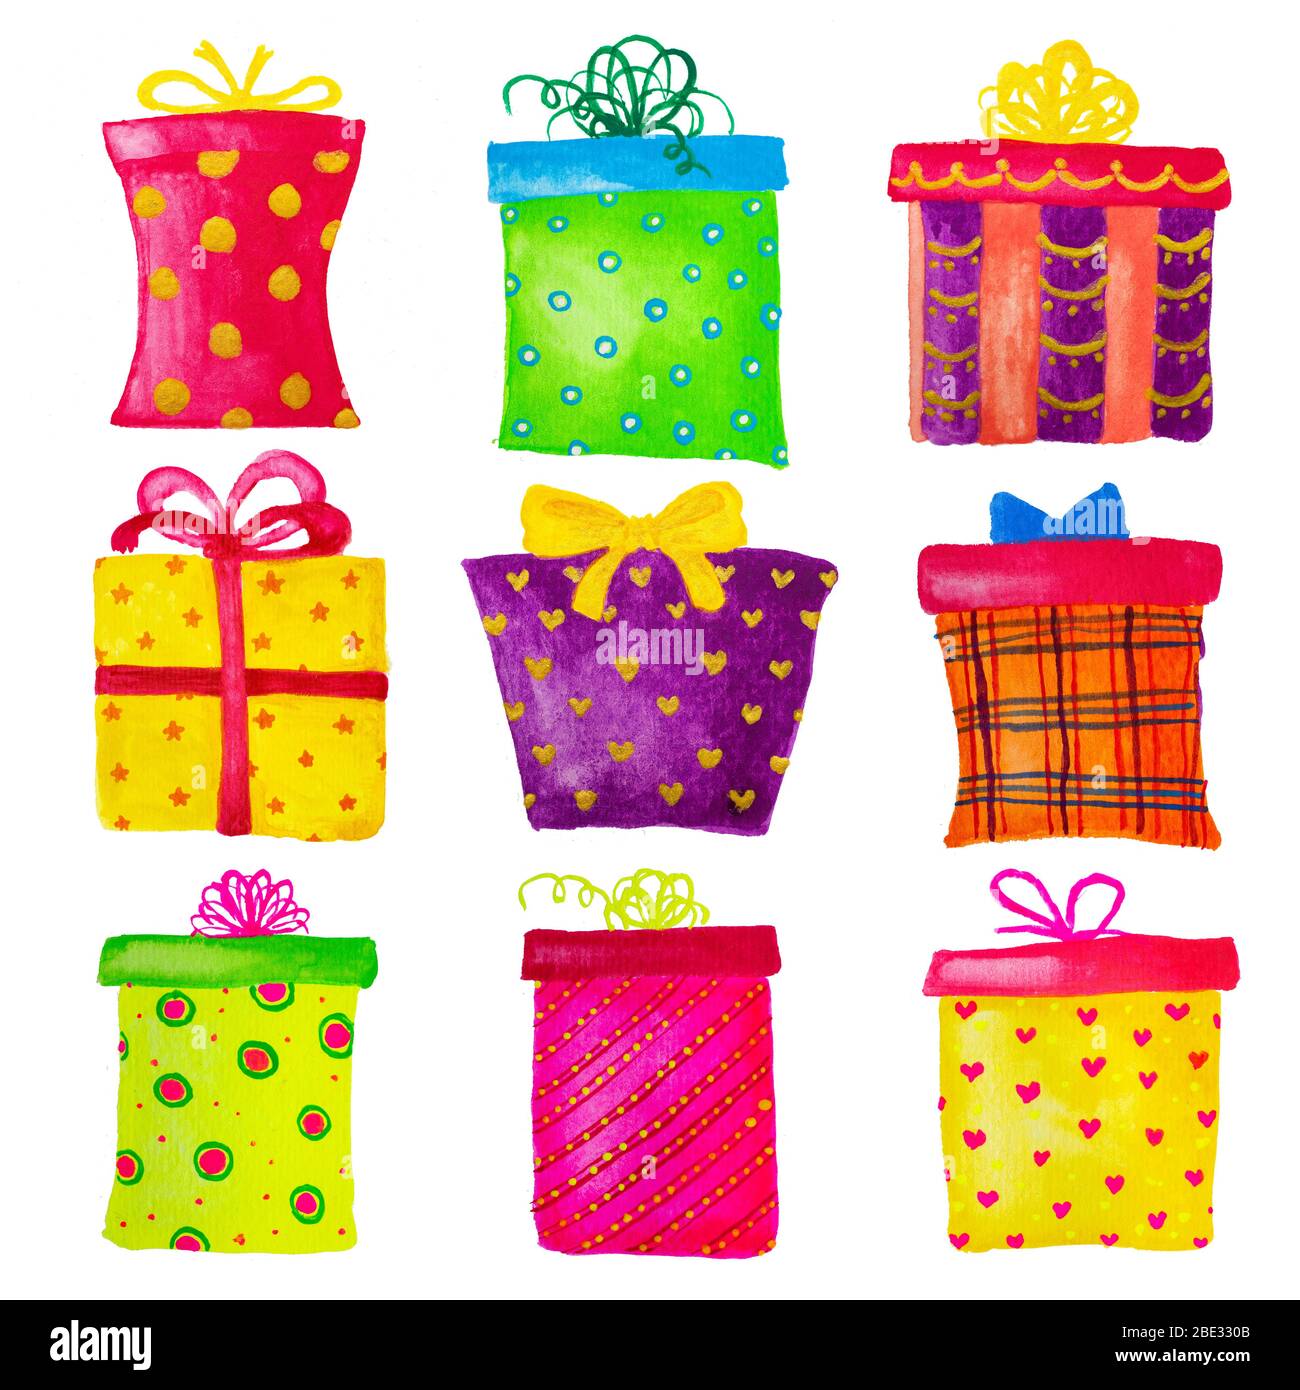 Watercolor painting drawings of several Christmas birthday presents gift boxes, isolated Stock Photo